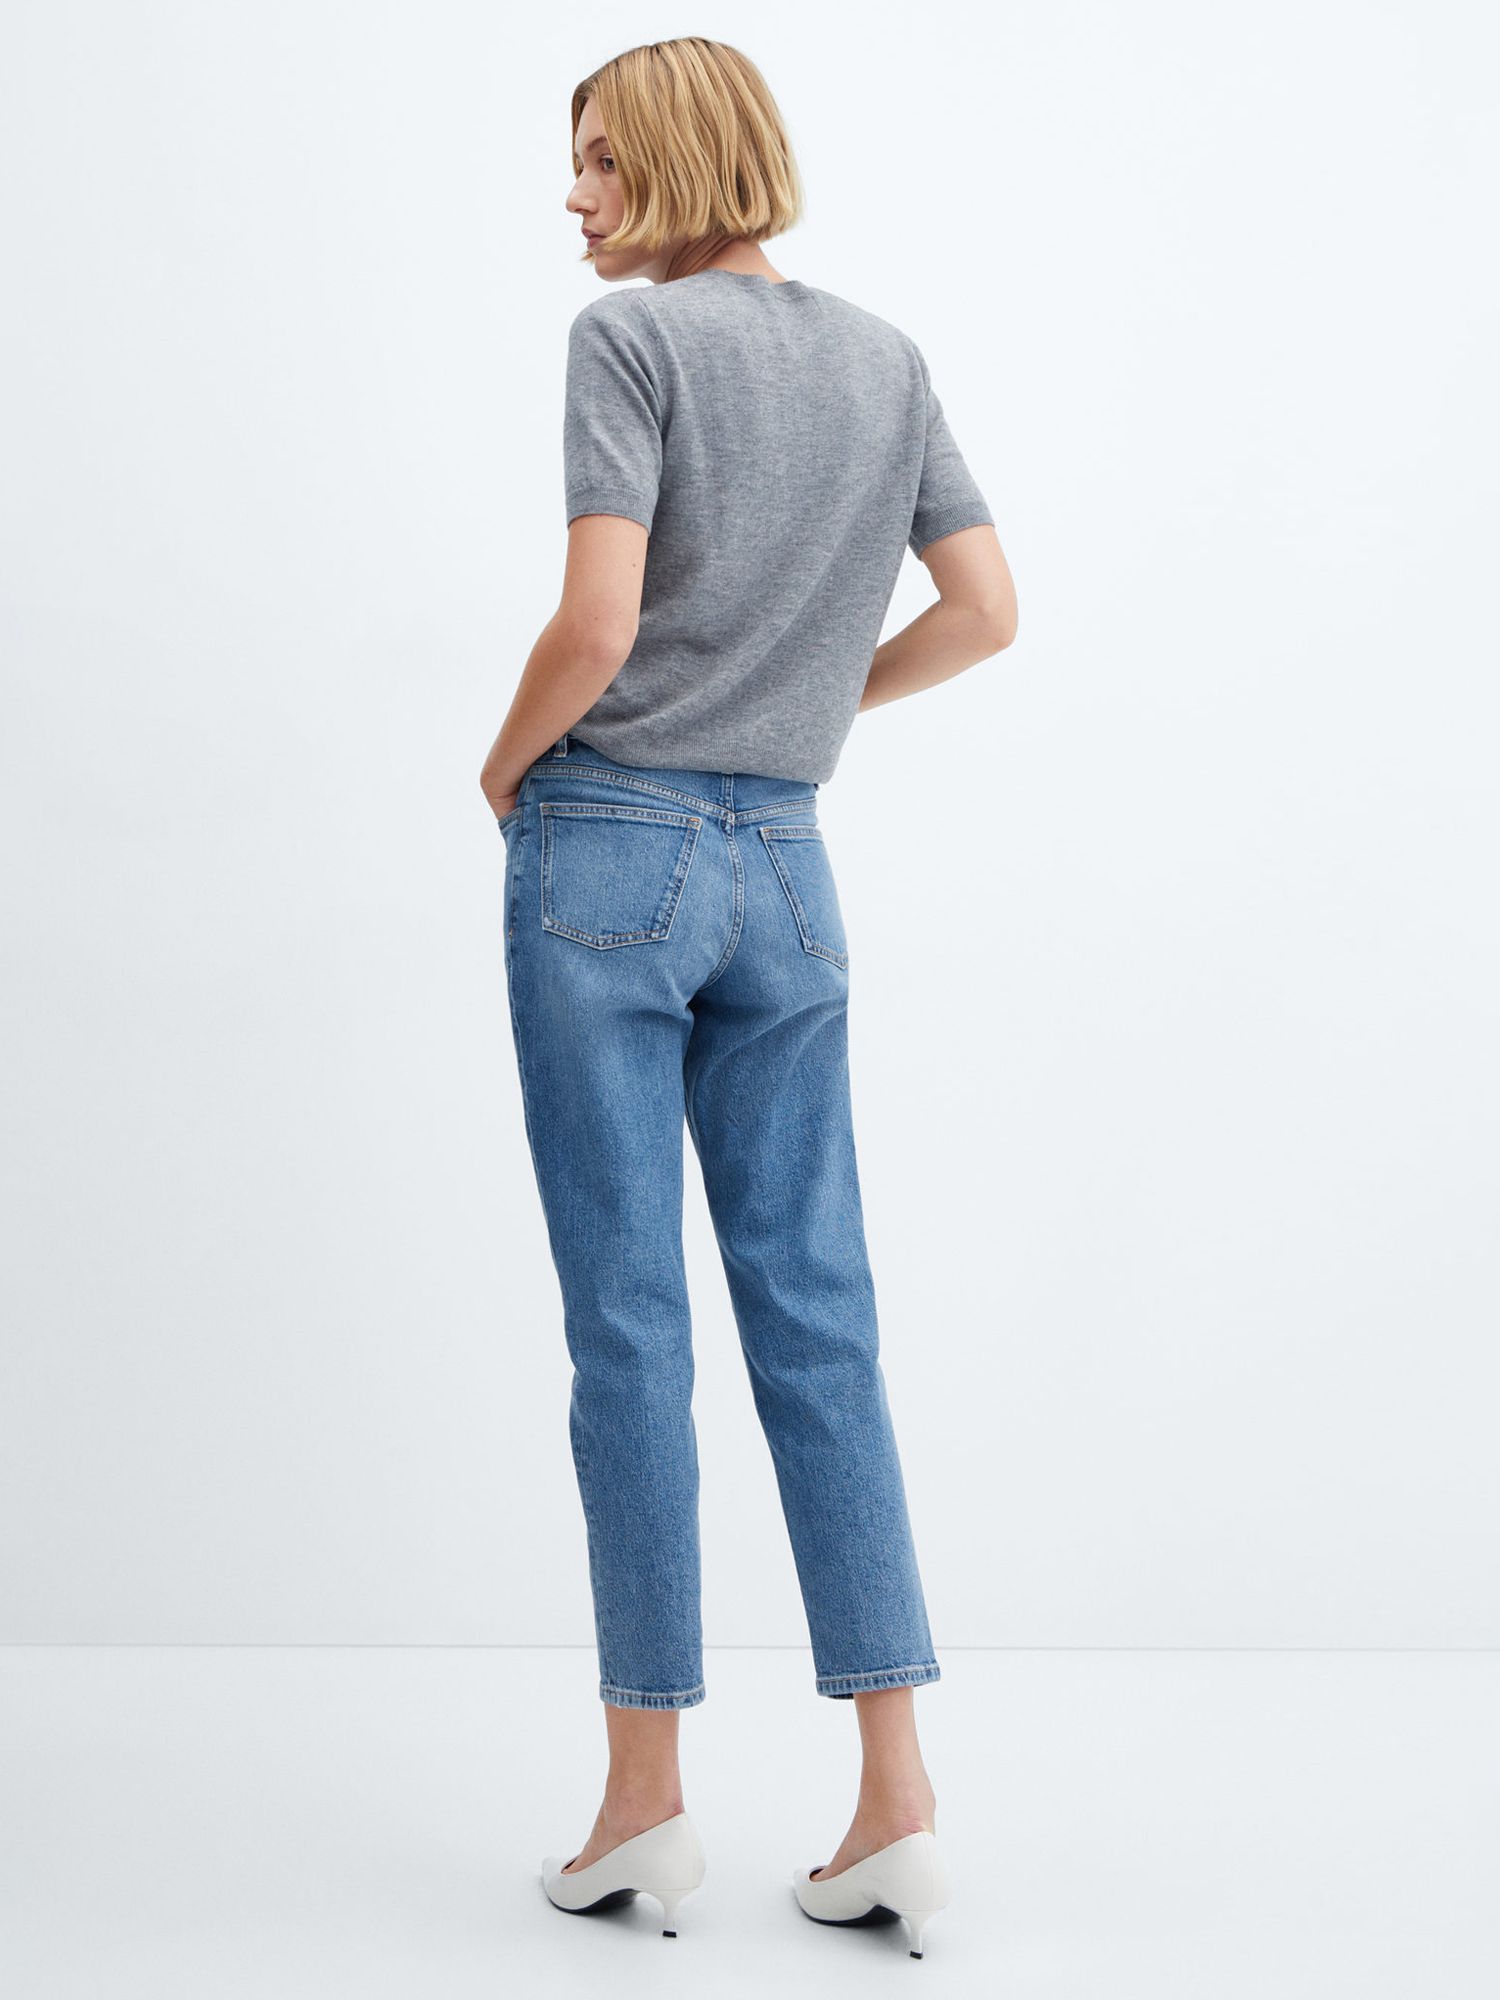 Buy Mango New Mom Cropped Jeans, Open Blue Online at johnlewis.com